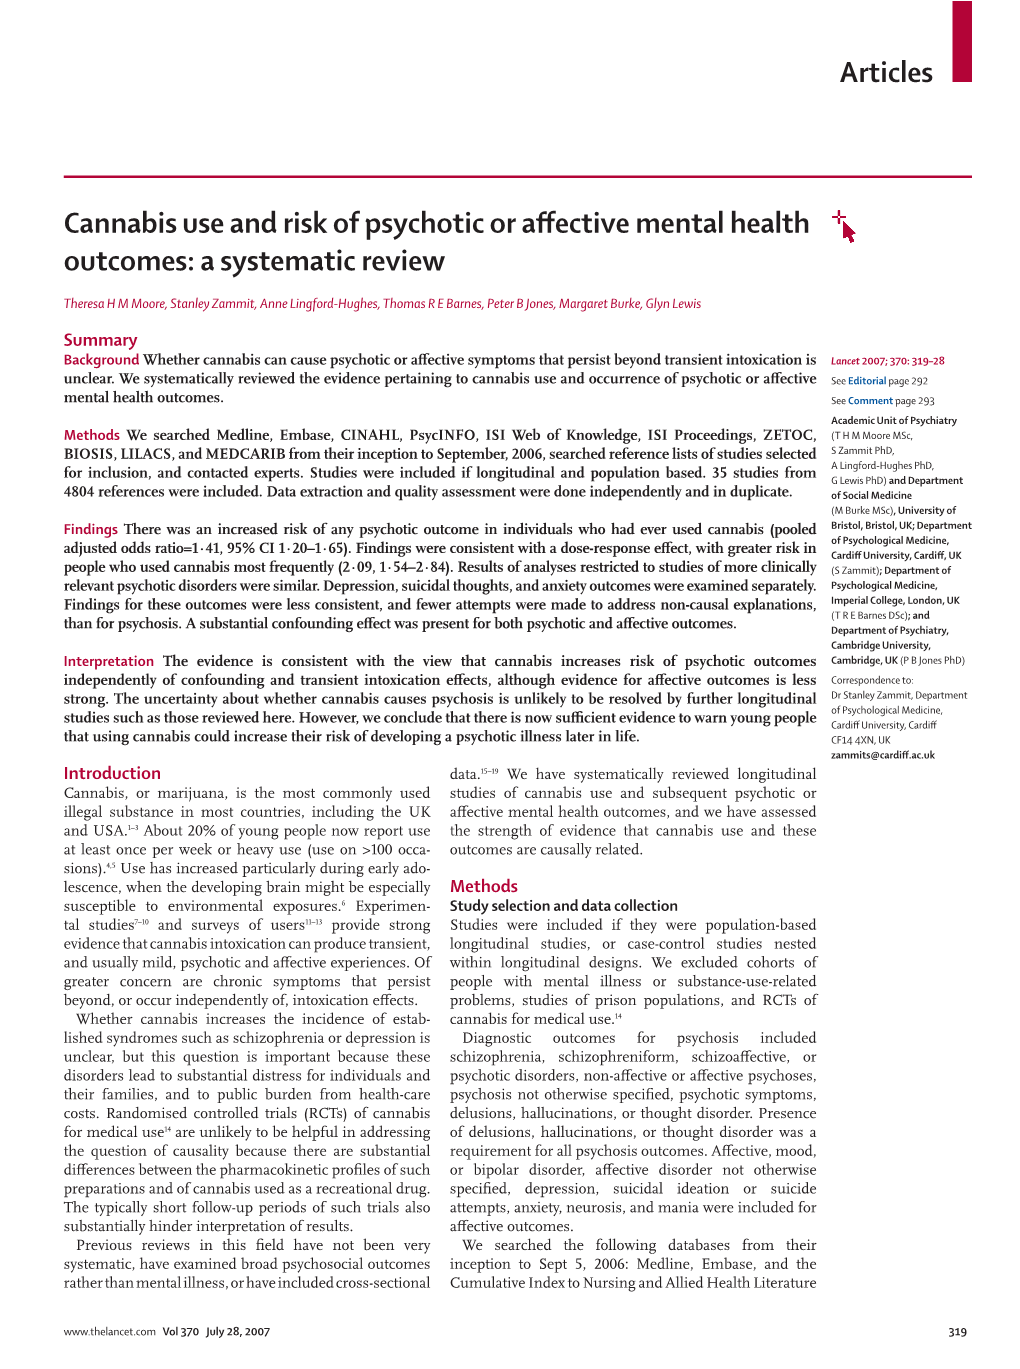 Cannabis Use and Risk of Psychotic Or Affective Mental Health Outcomes